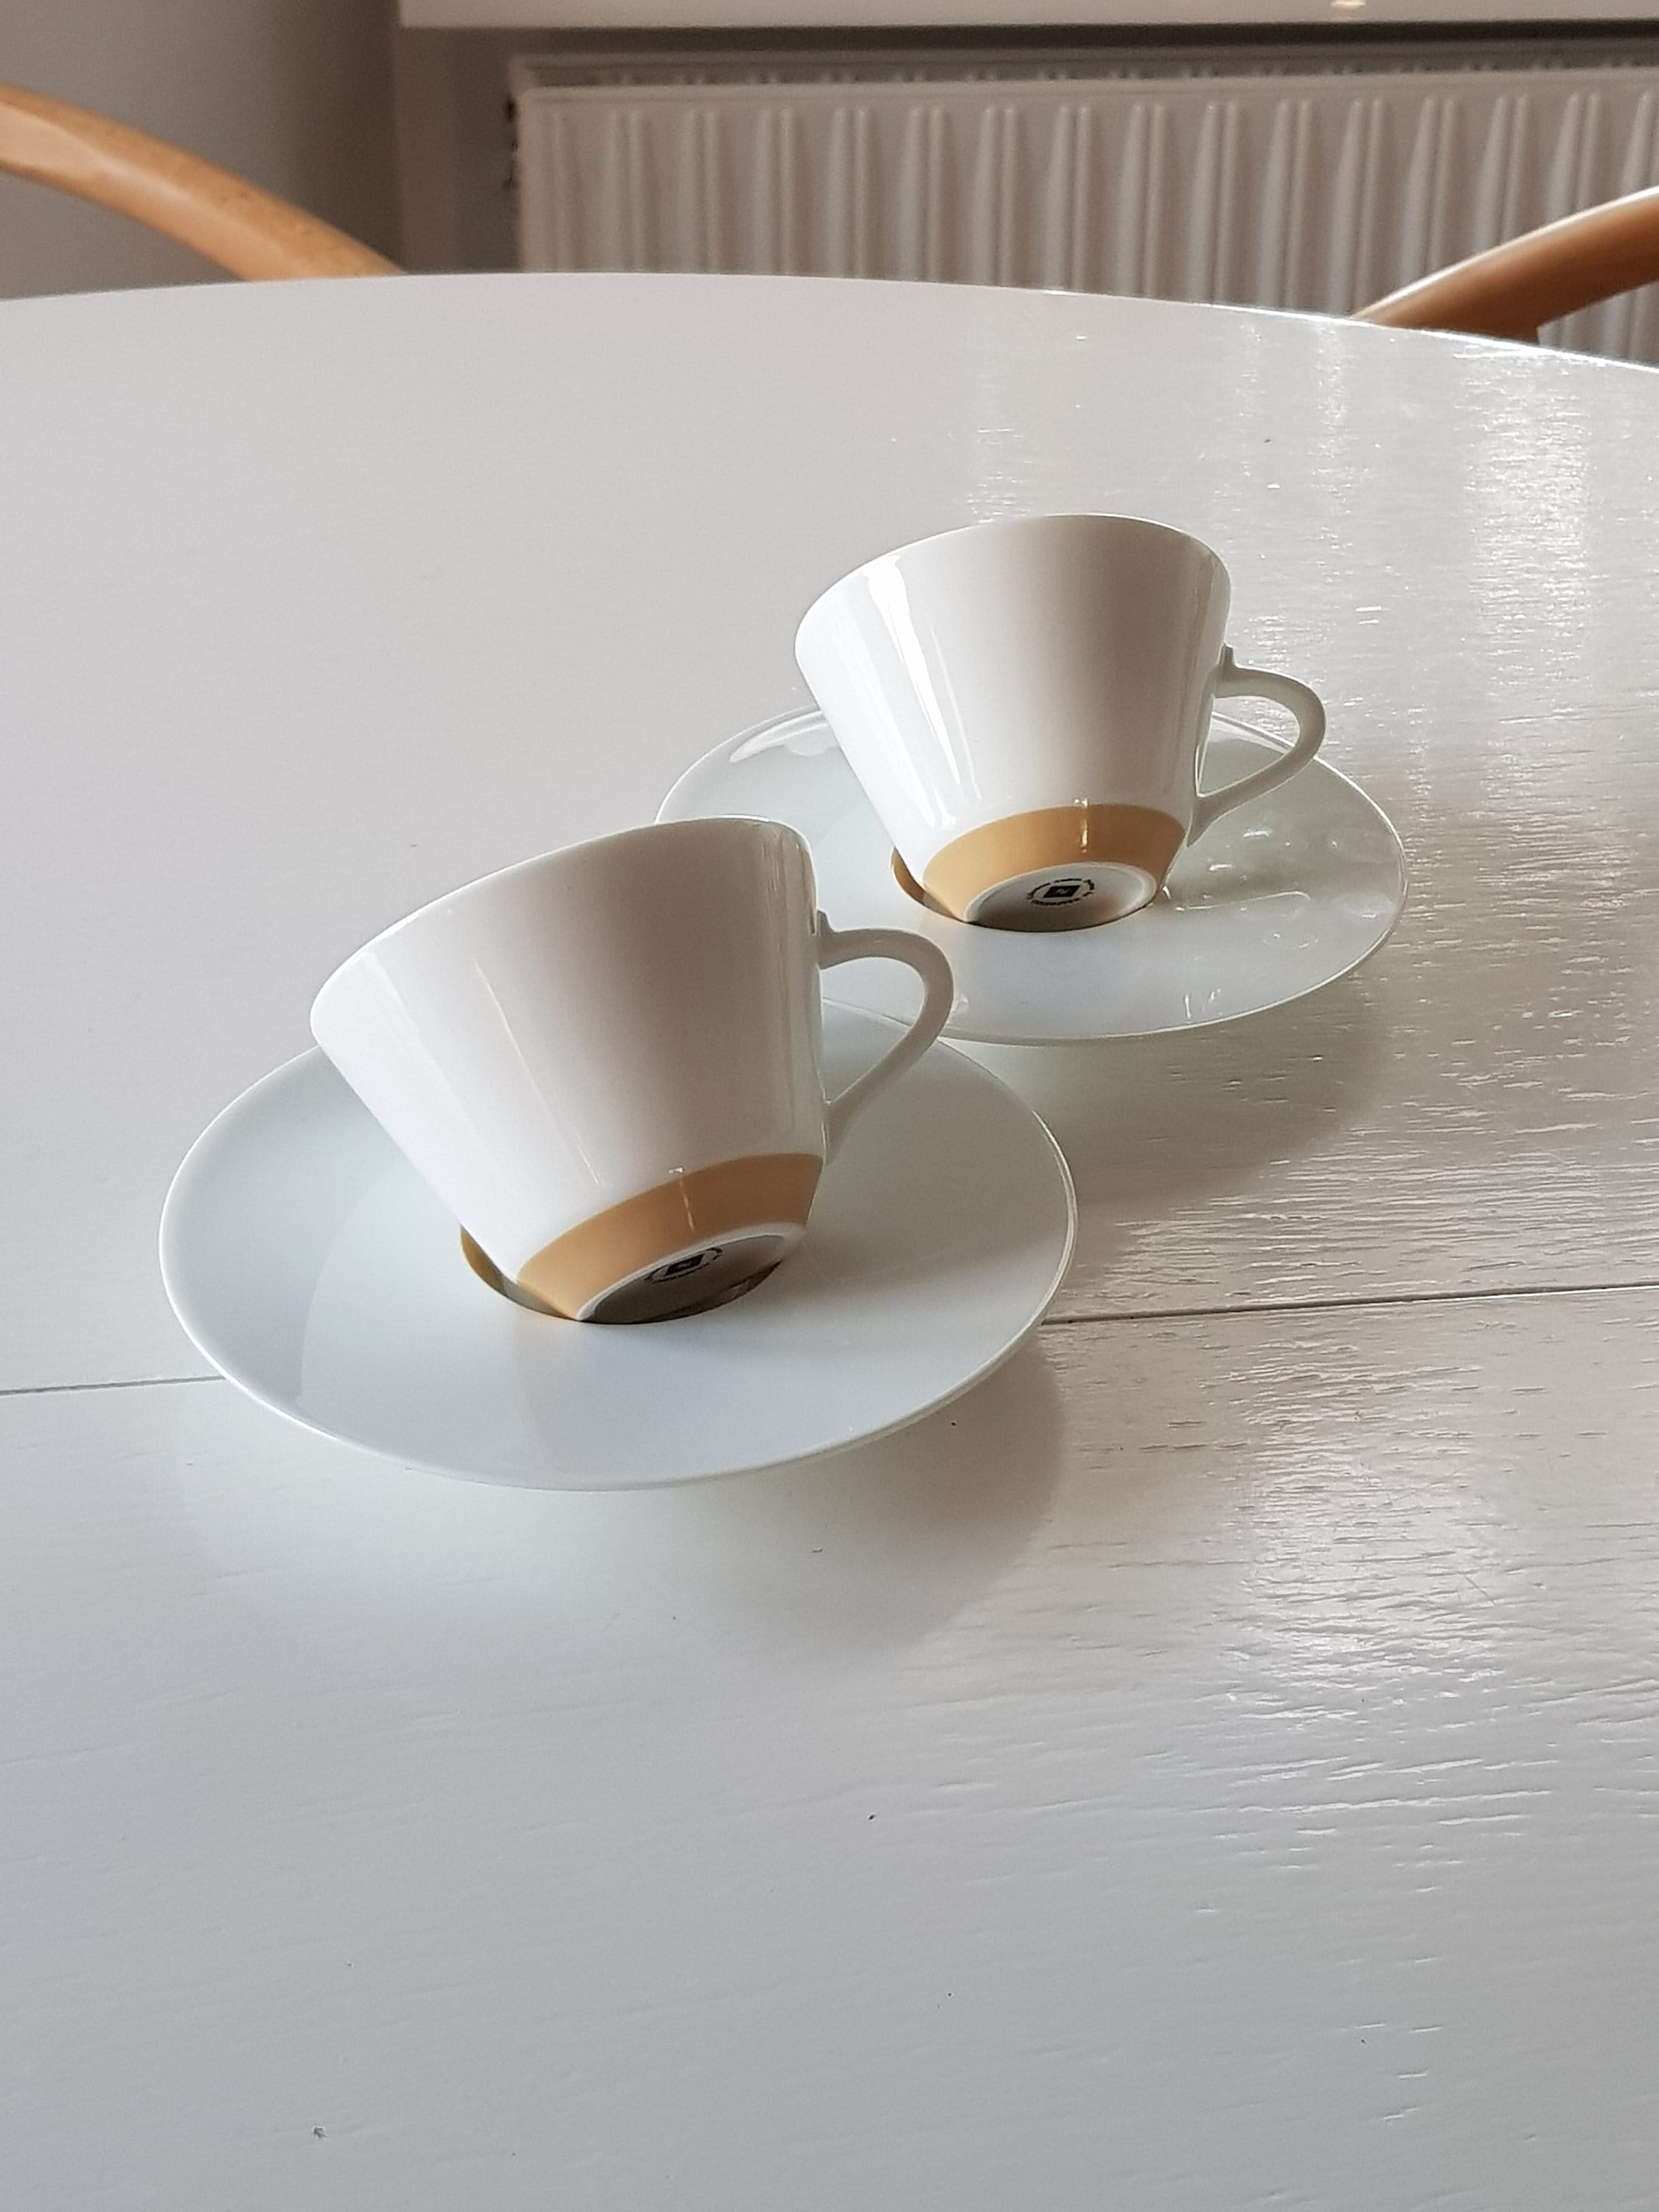 Very Rare Original Box of Nespresso Ritual Set of 2 Porcelain Cappuccino  Cups With Saucers, Andree Putman Design Ritual. New and Unused. 